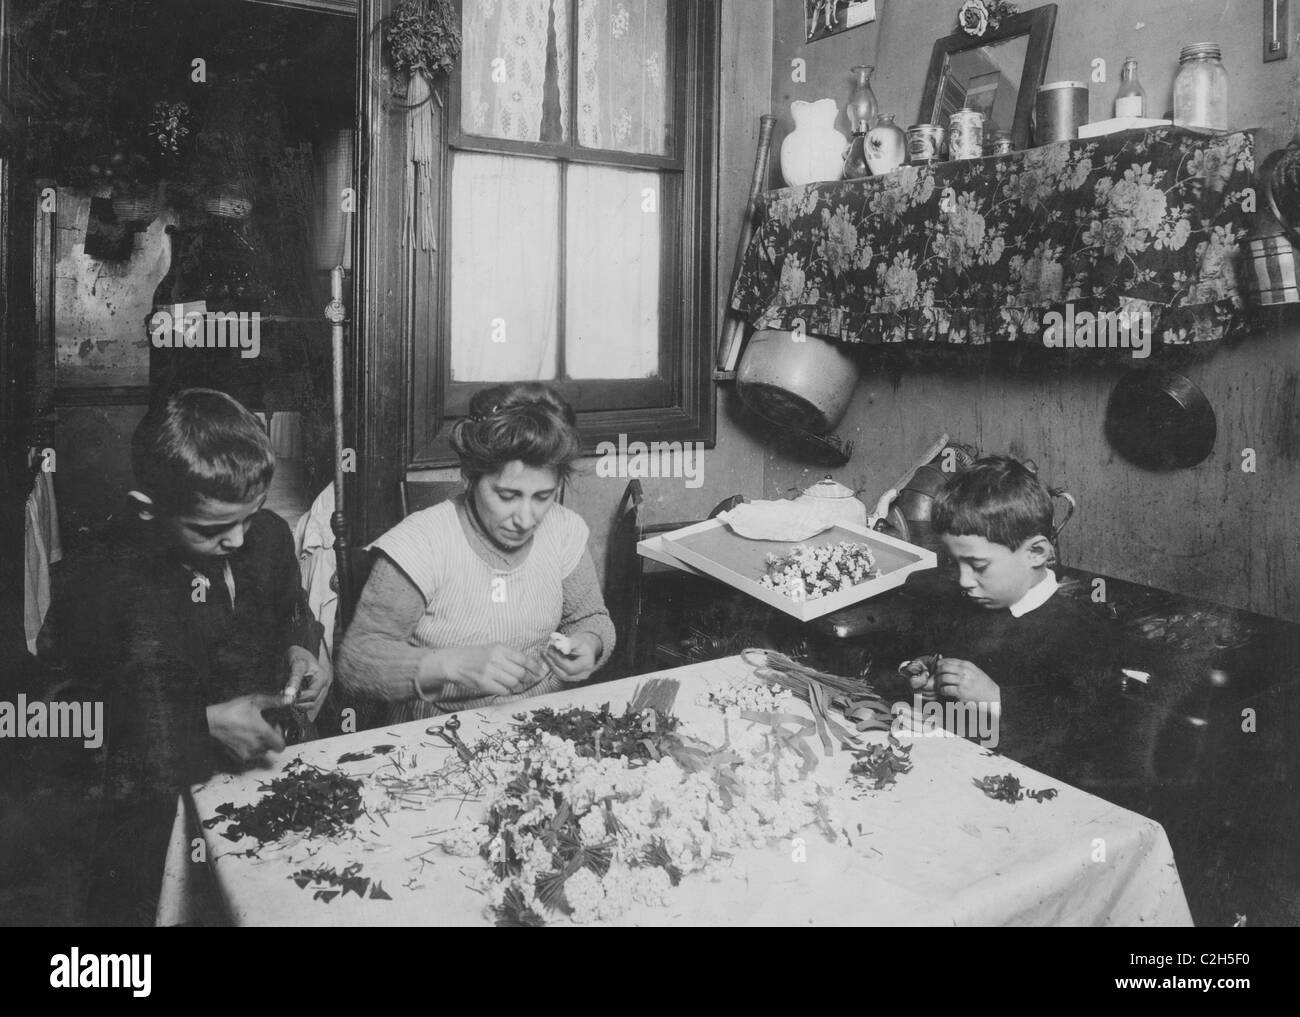 Mrs. A.L.A. She & her 3 children - 11, 9, & 6 yrs old work at flower making. Stock Photo